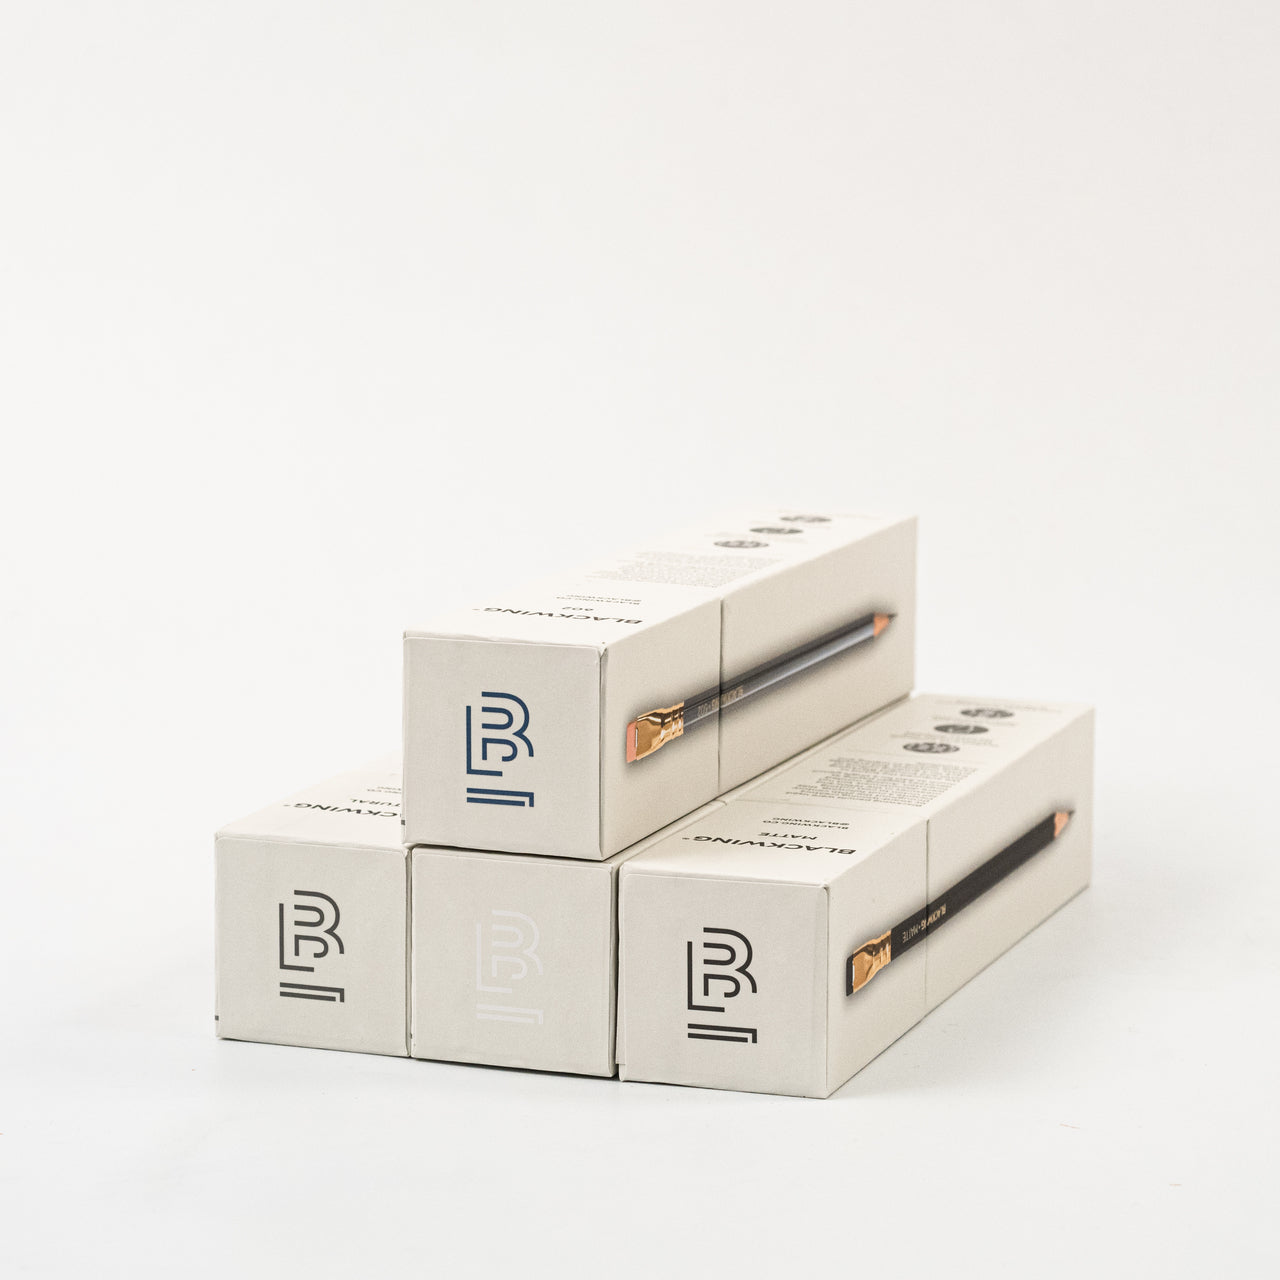 Blackwing pencil boxs stacked